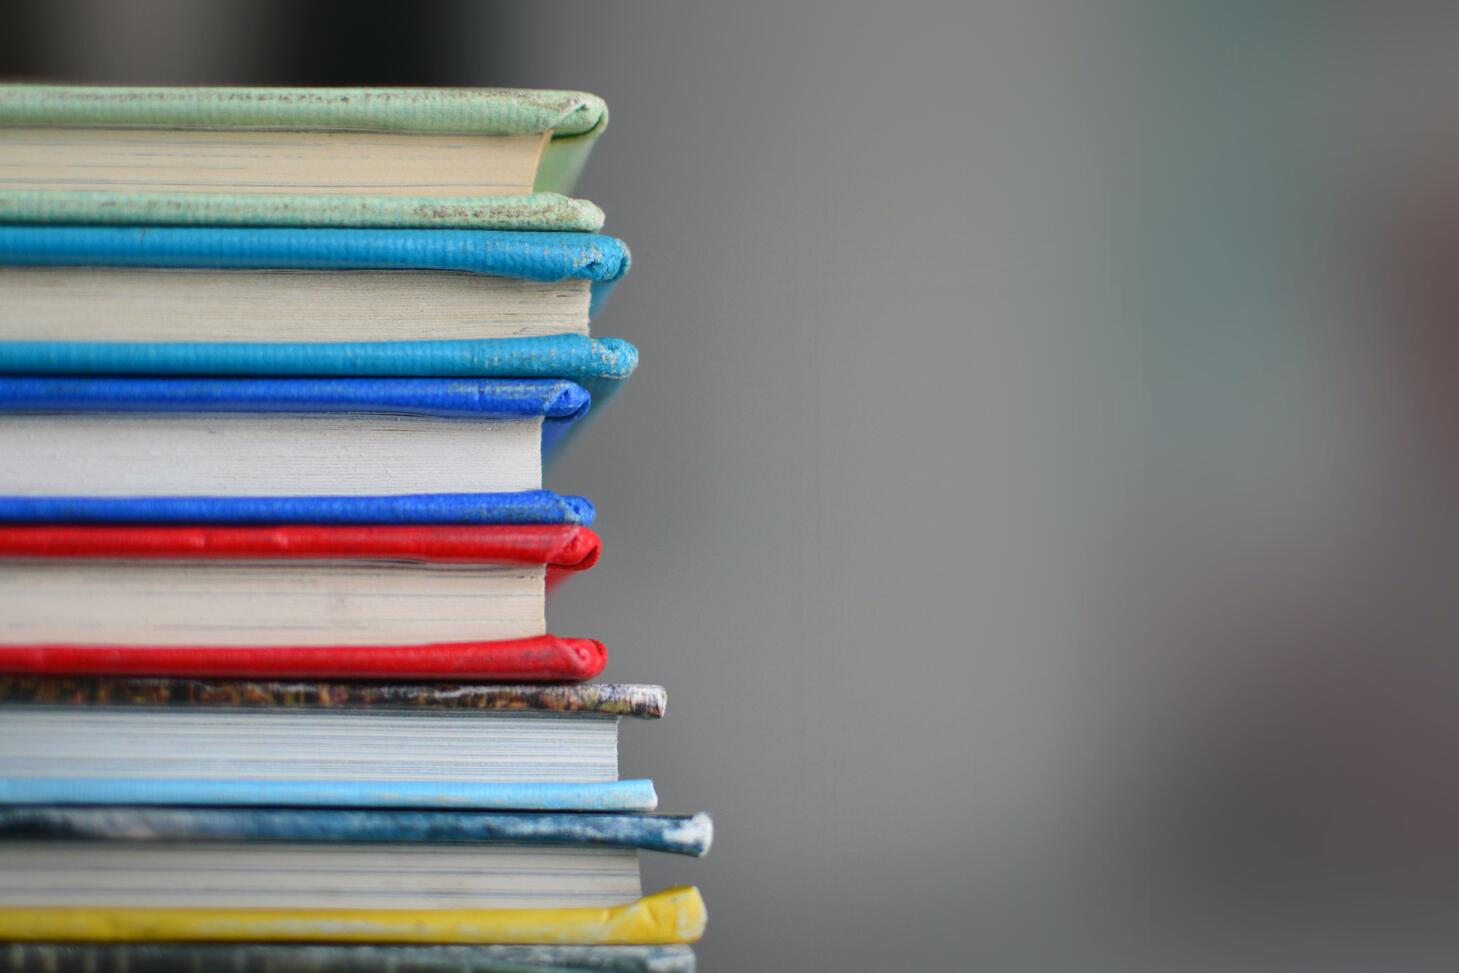 Photo of a stack of books, by Kimberly Farmer on Unsplash